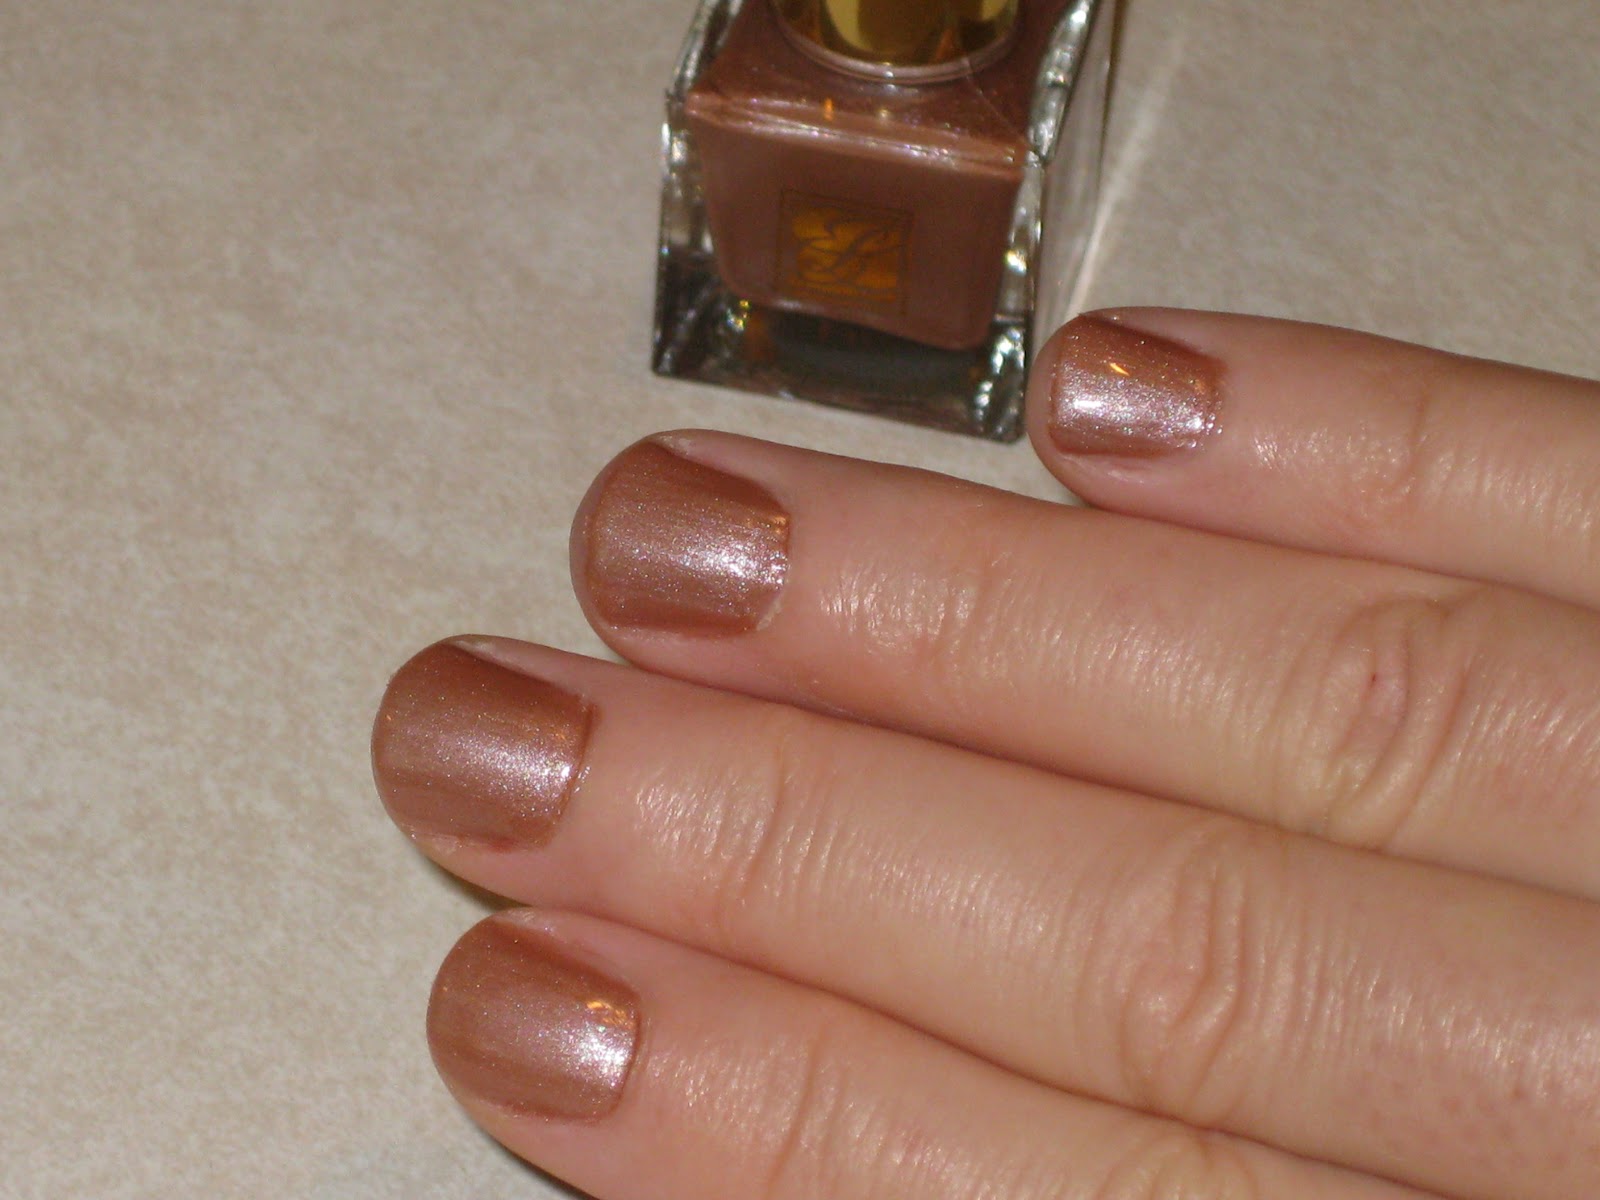 Estee Lauder Pure Color Nail Lacquer in Rose Gold - wide 5